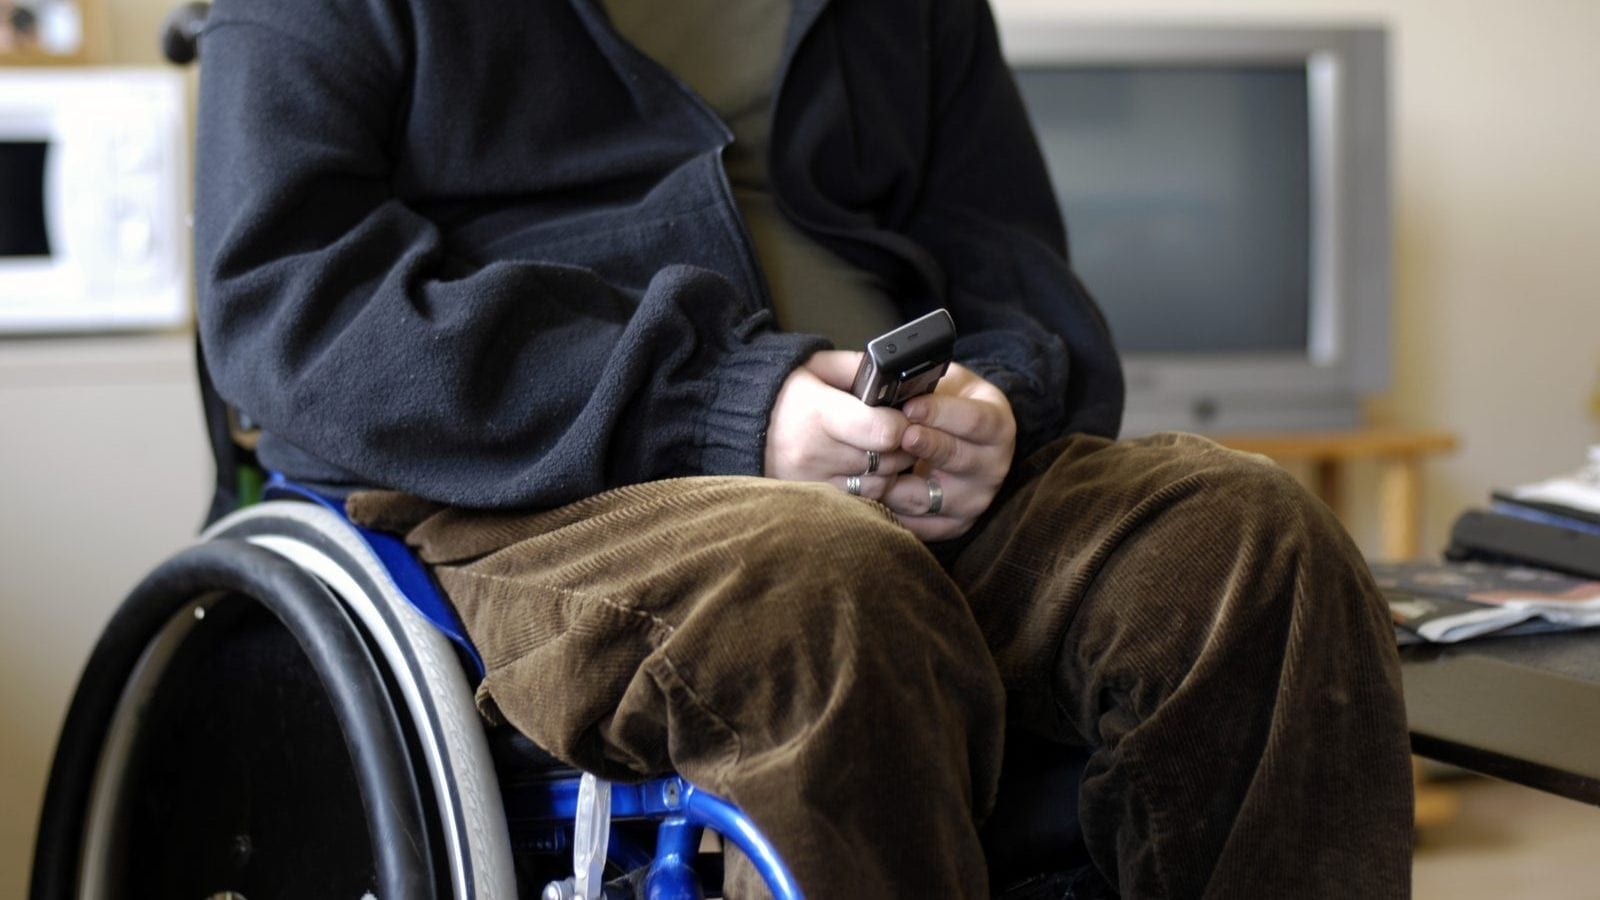 A young man texting on his phone in a wheelchair